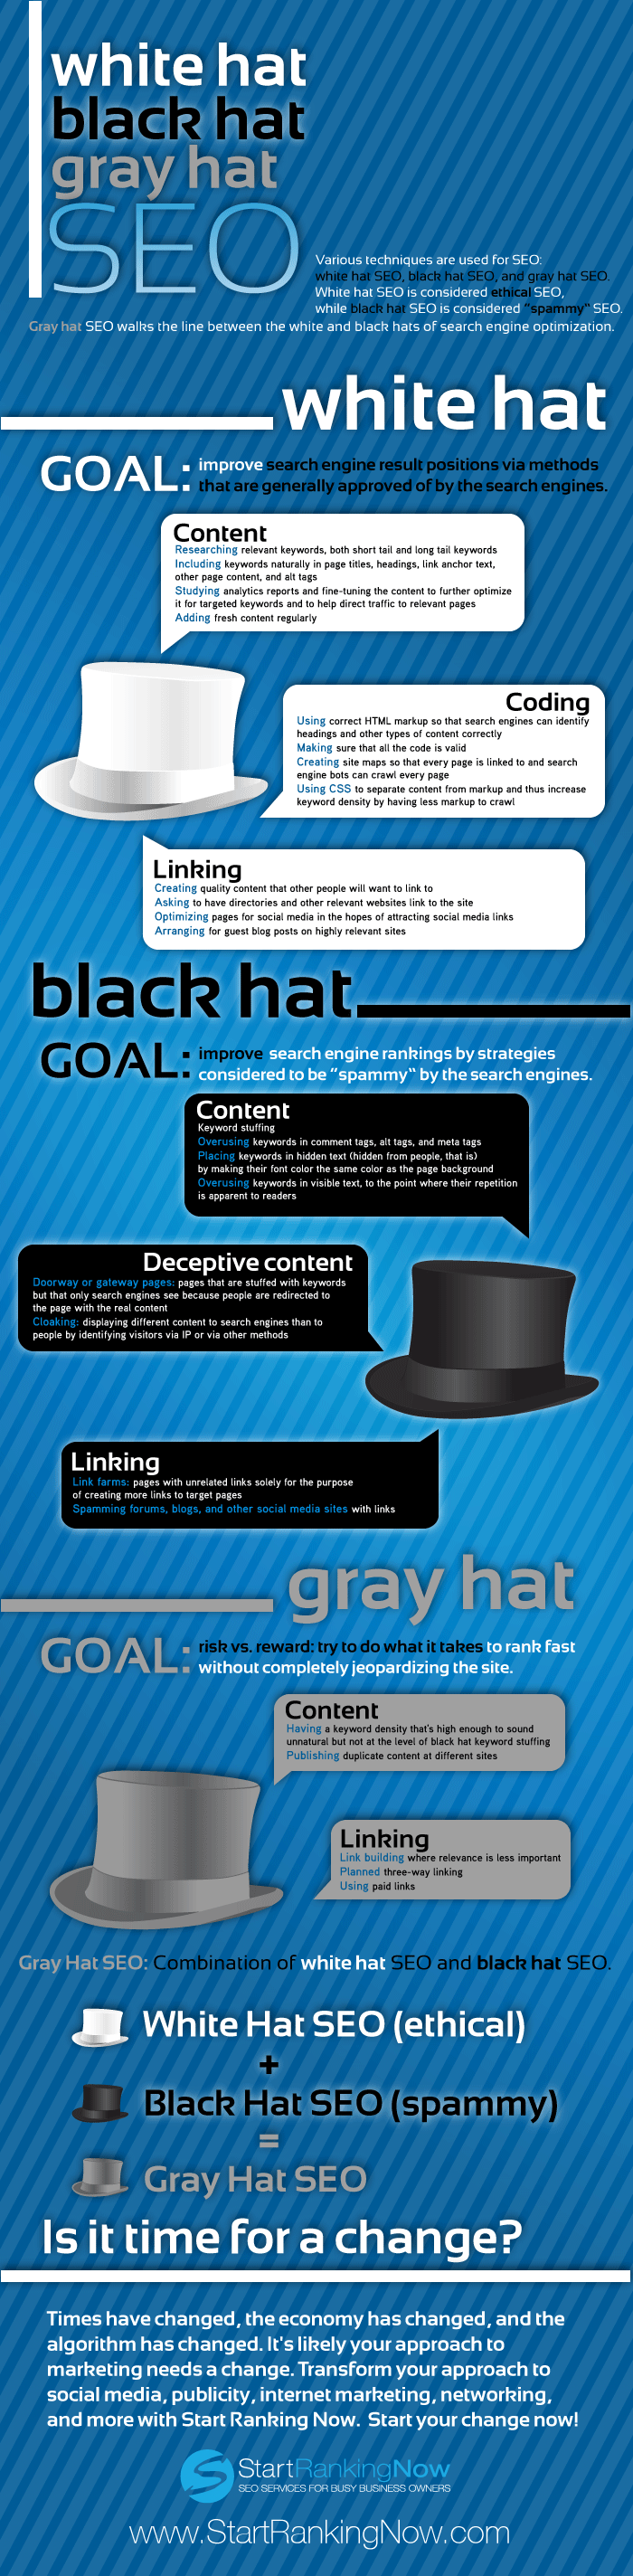 White Hat, Black Hat and Gray Hat SEO